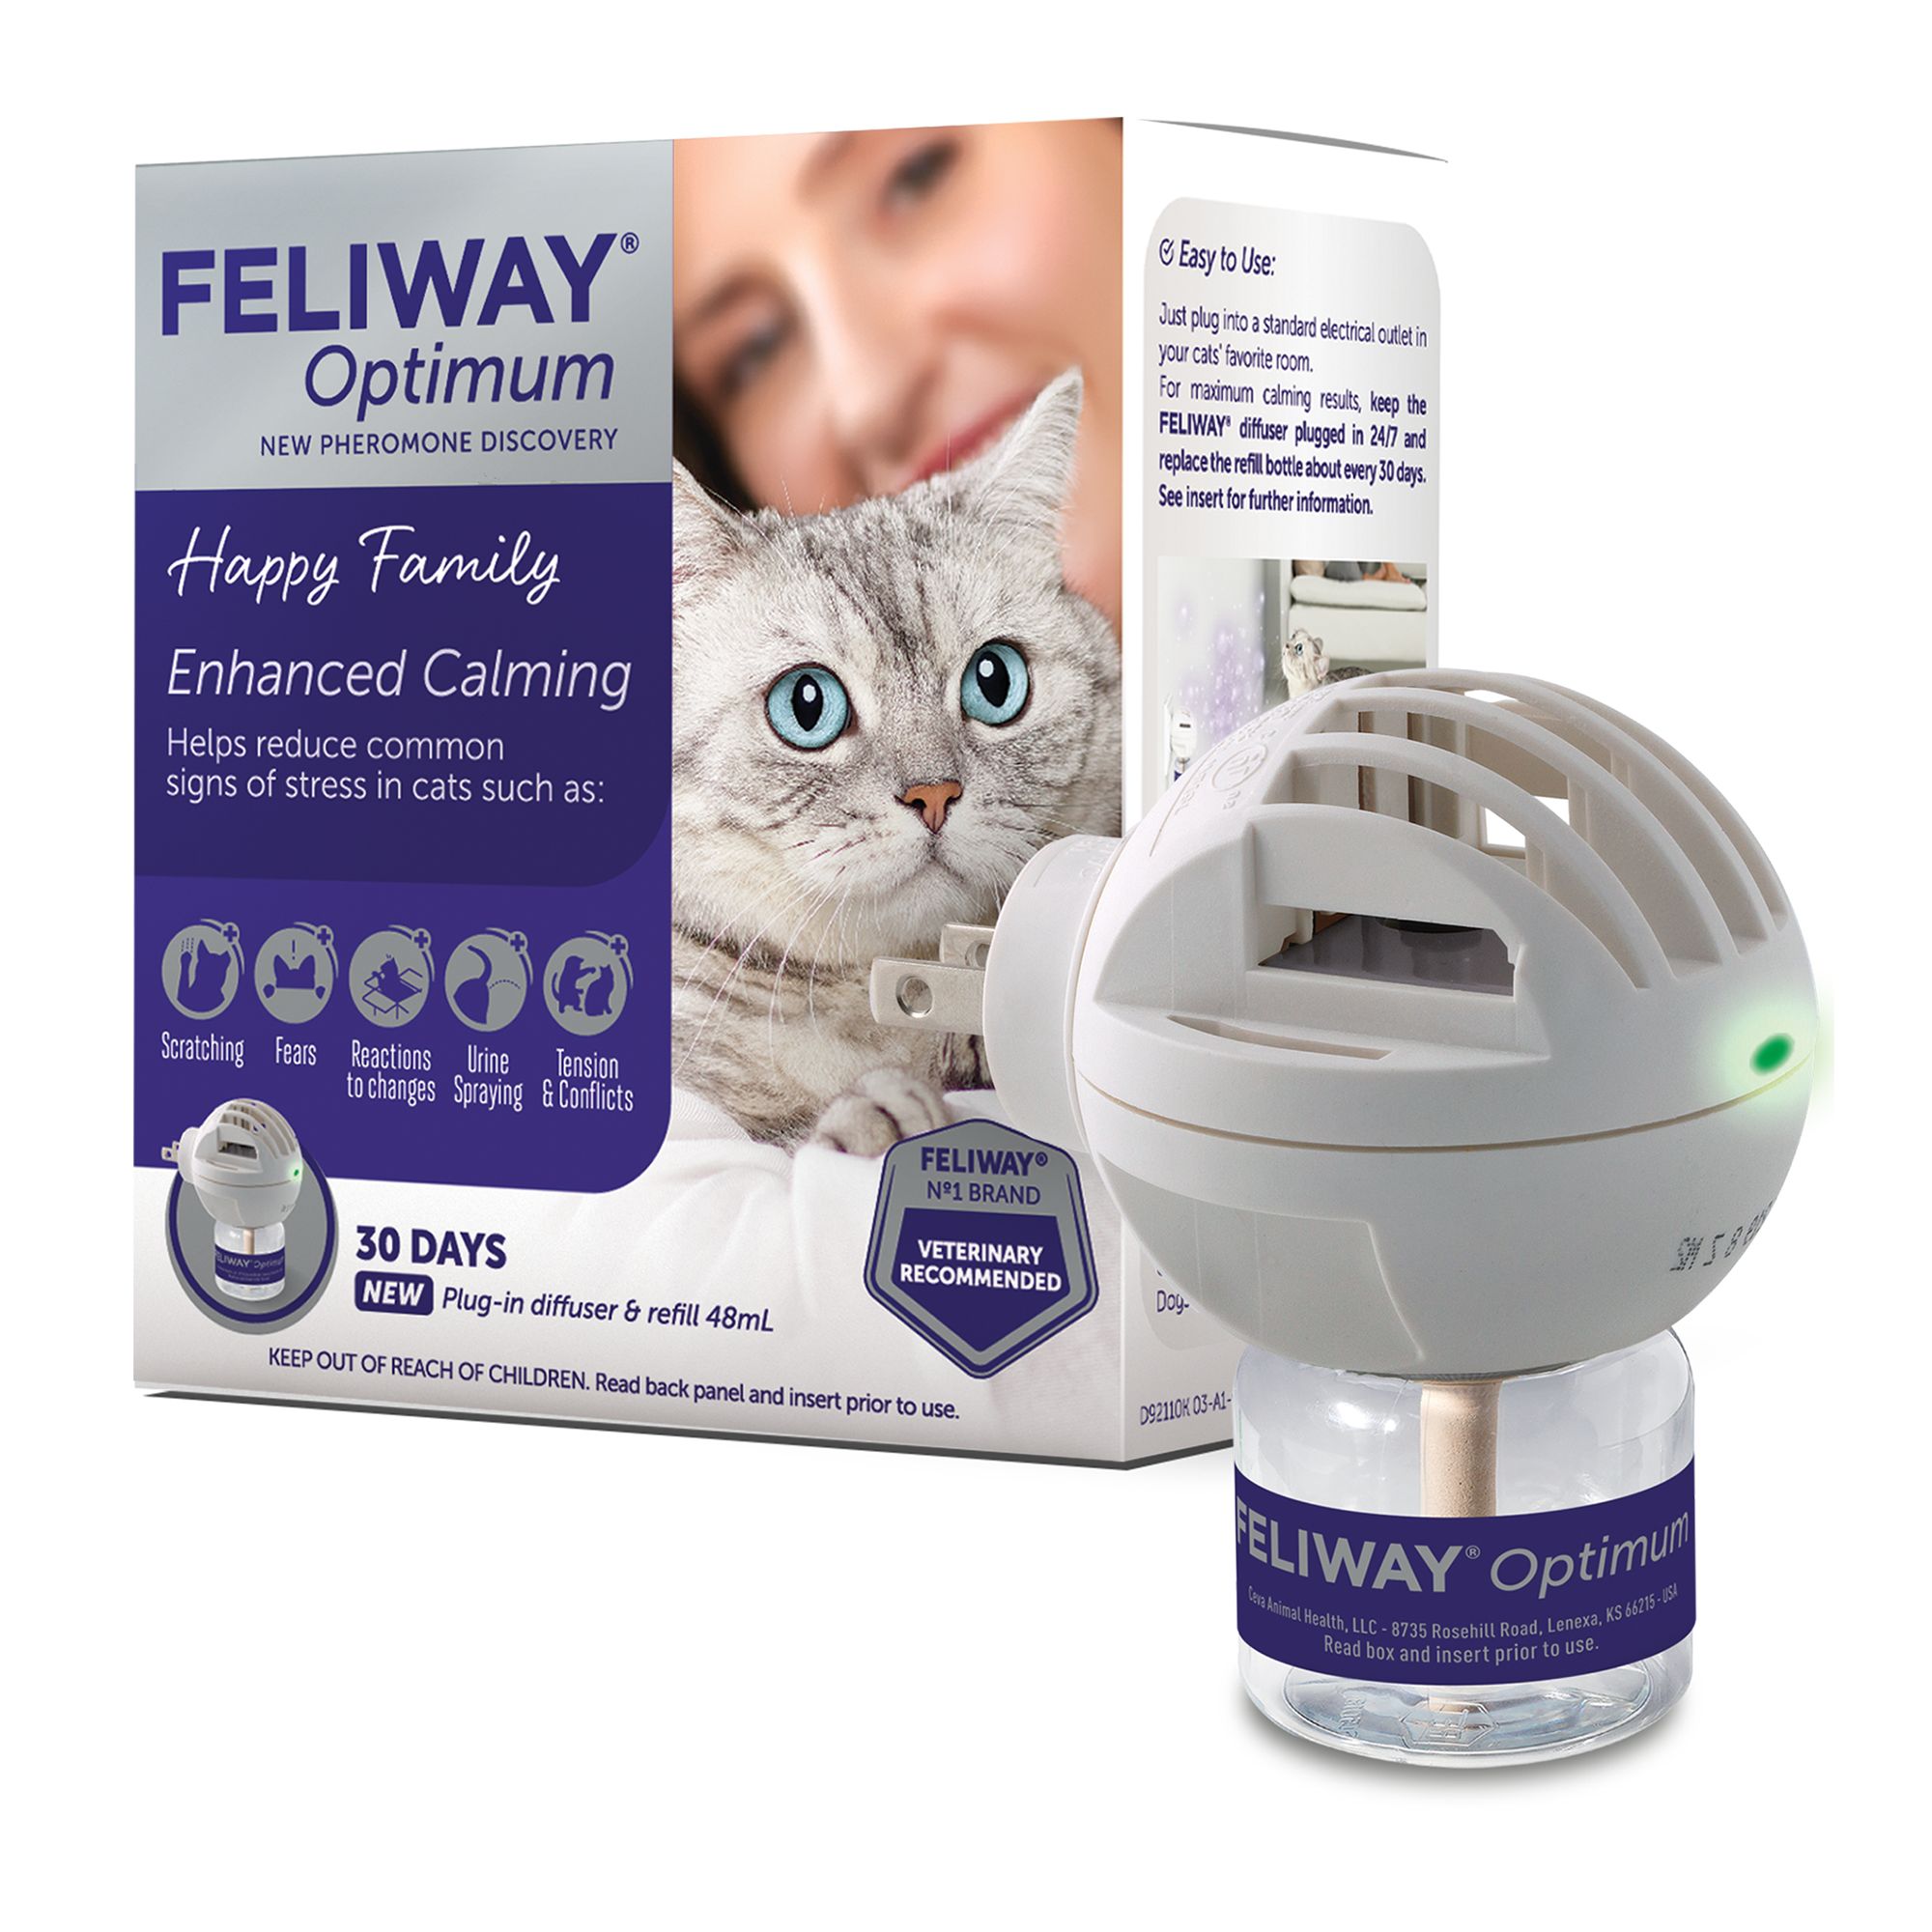 Feliway Classic 30 Day Starter Kit Diffuseur Apaisant pour Chats – PetMax